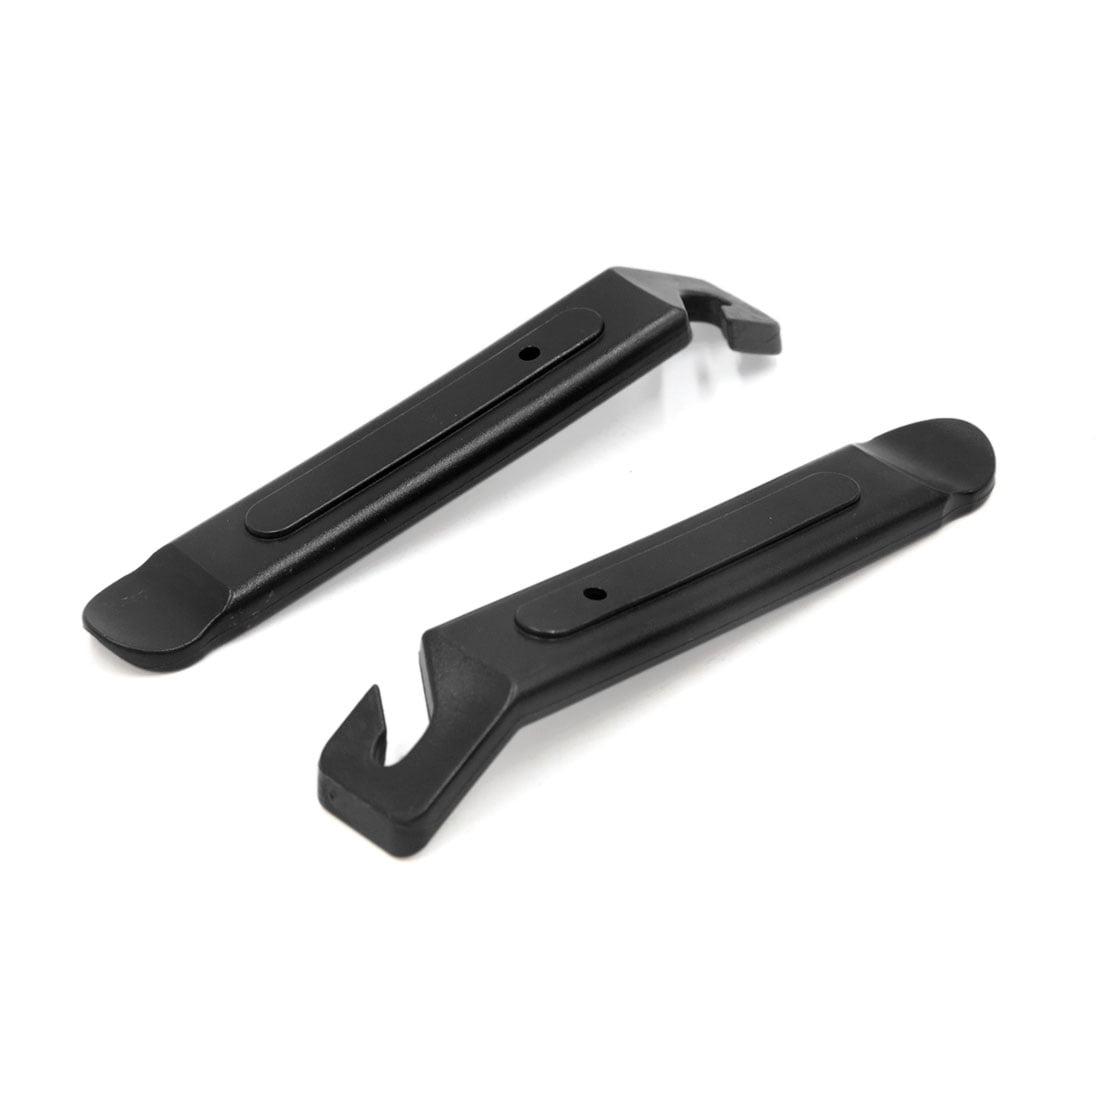 2Pcs Bike Tire Black Plastic Pry Bicycle Tire Levers Tyre Repair Removal Tool 